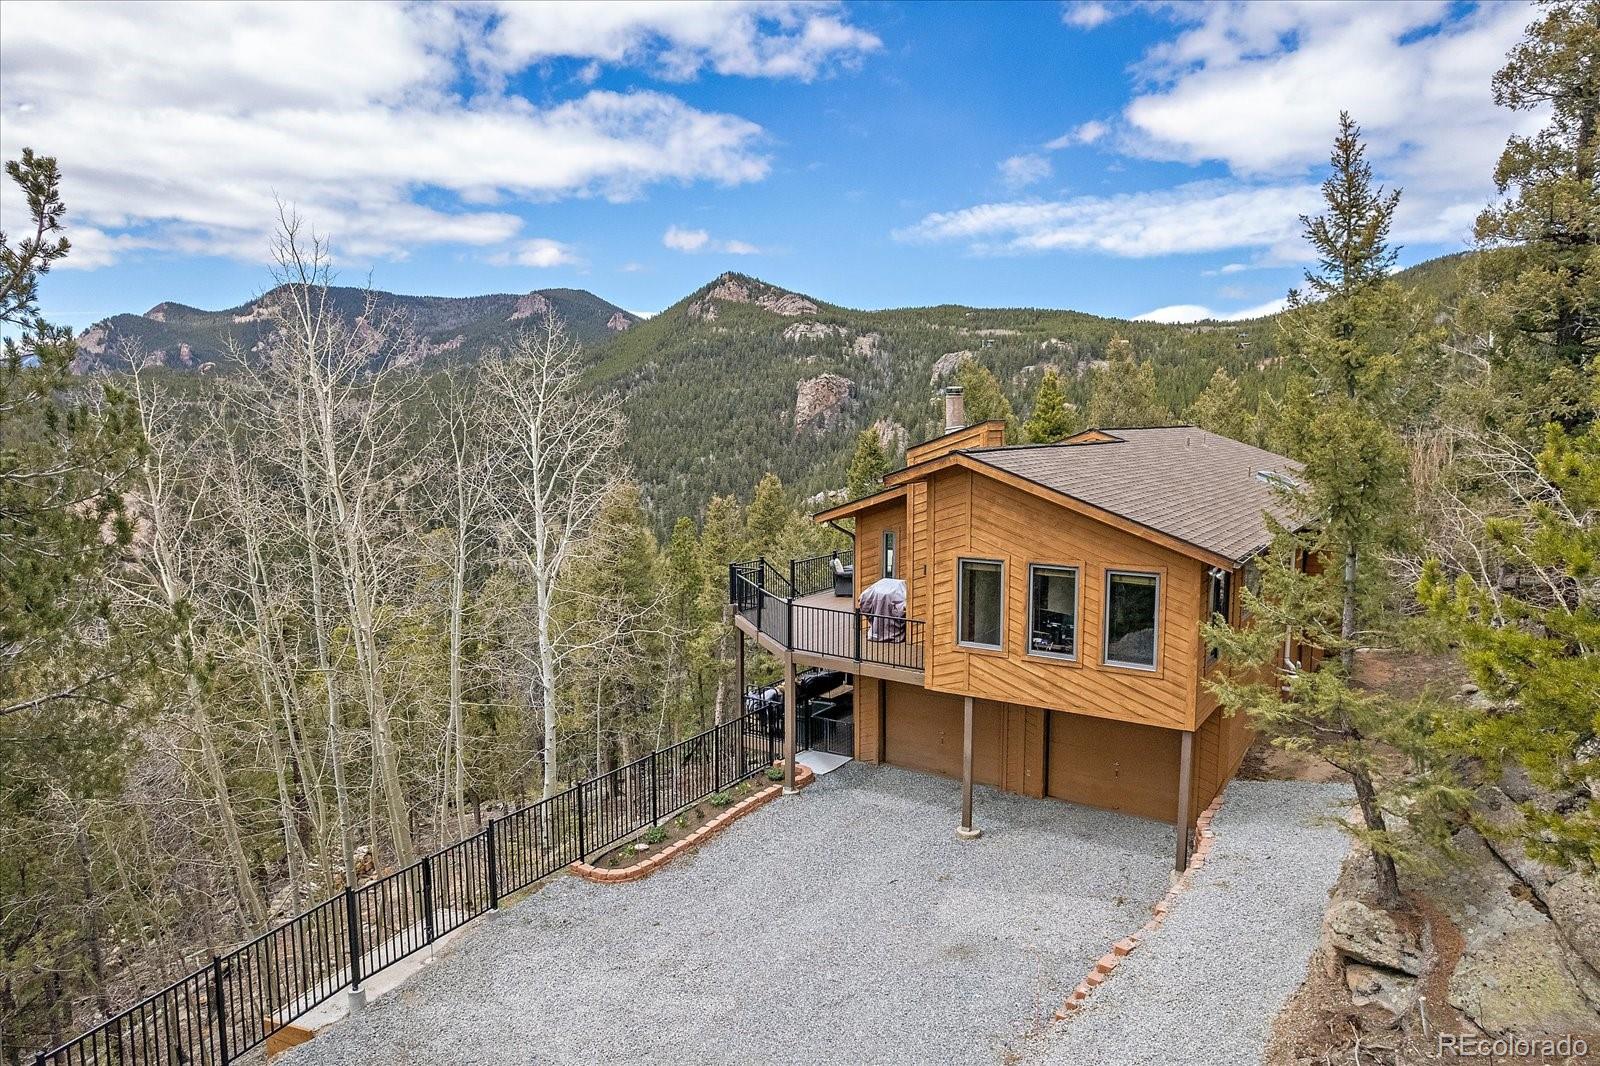 11401  Marks Drive, conifer MLS: 3426200 Beds: 3 Baths: 2 Price: $825,000